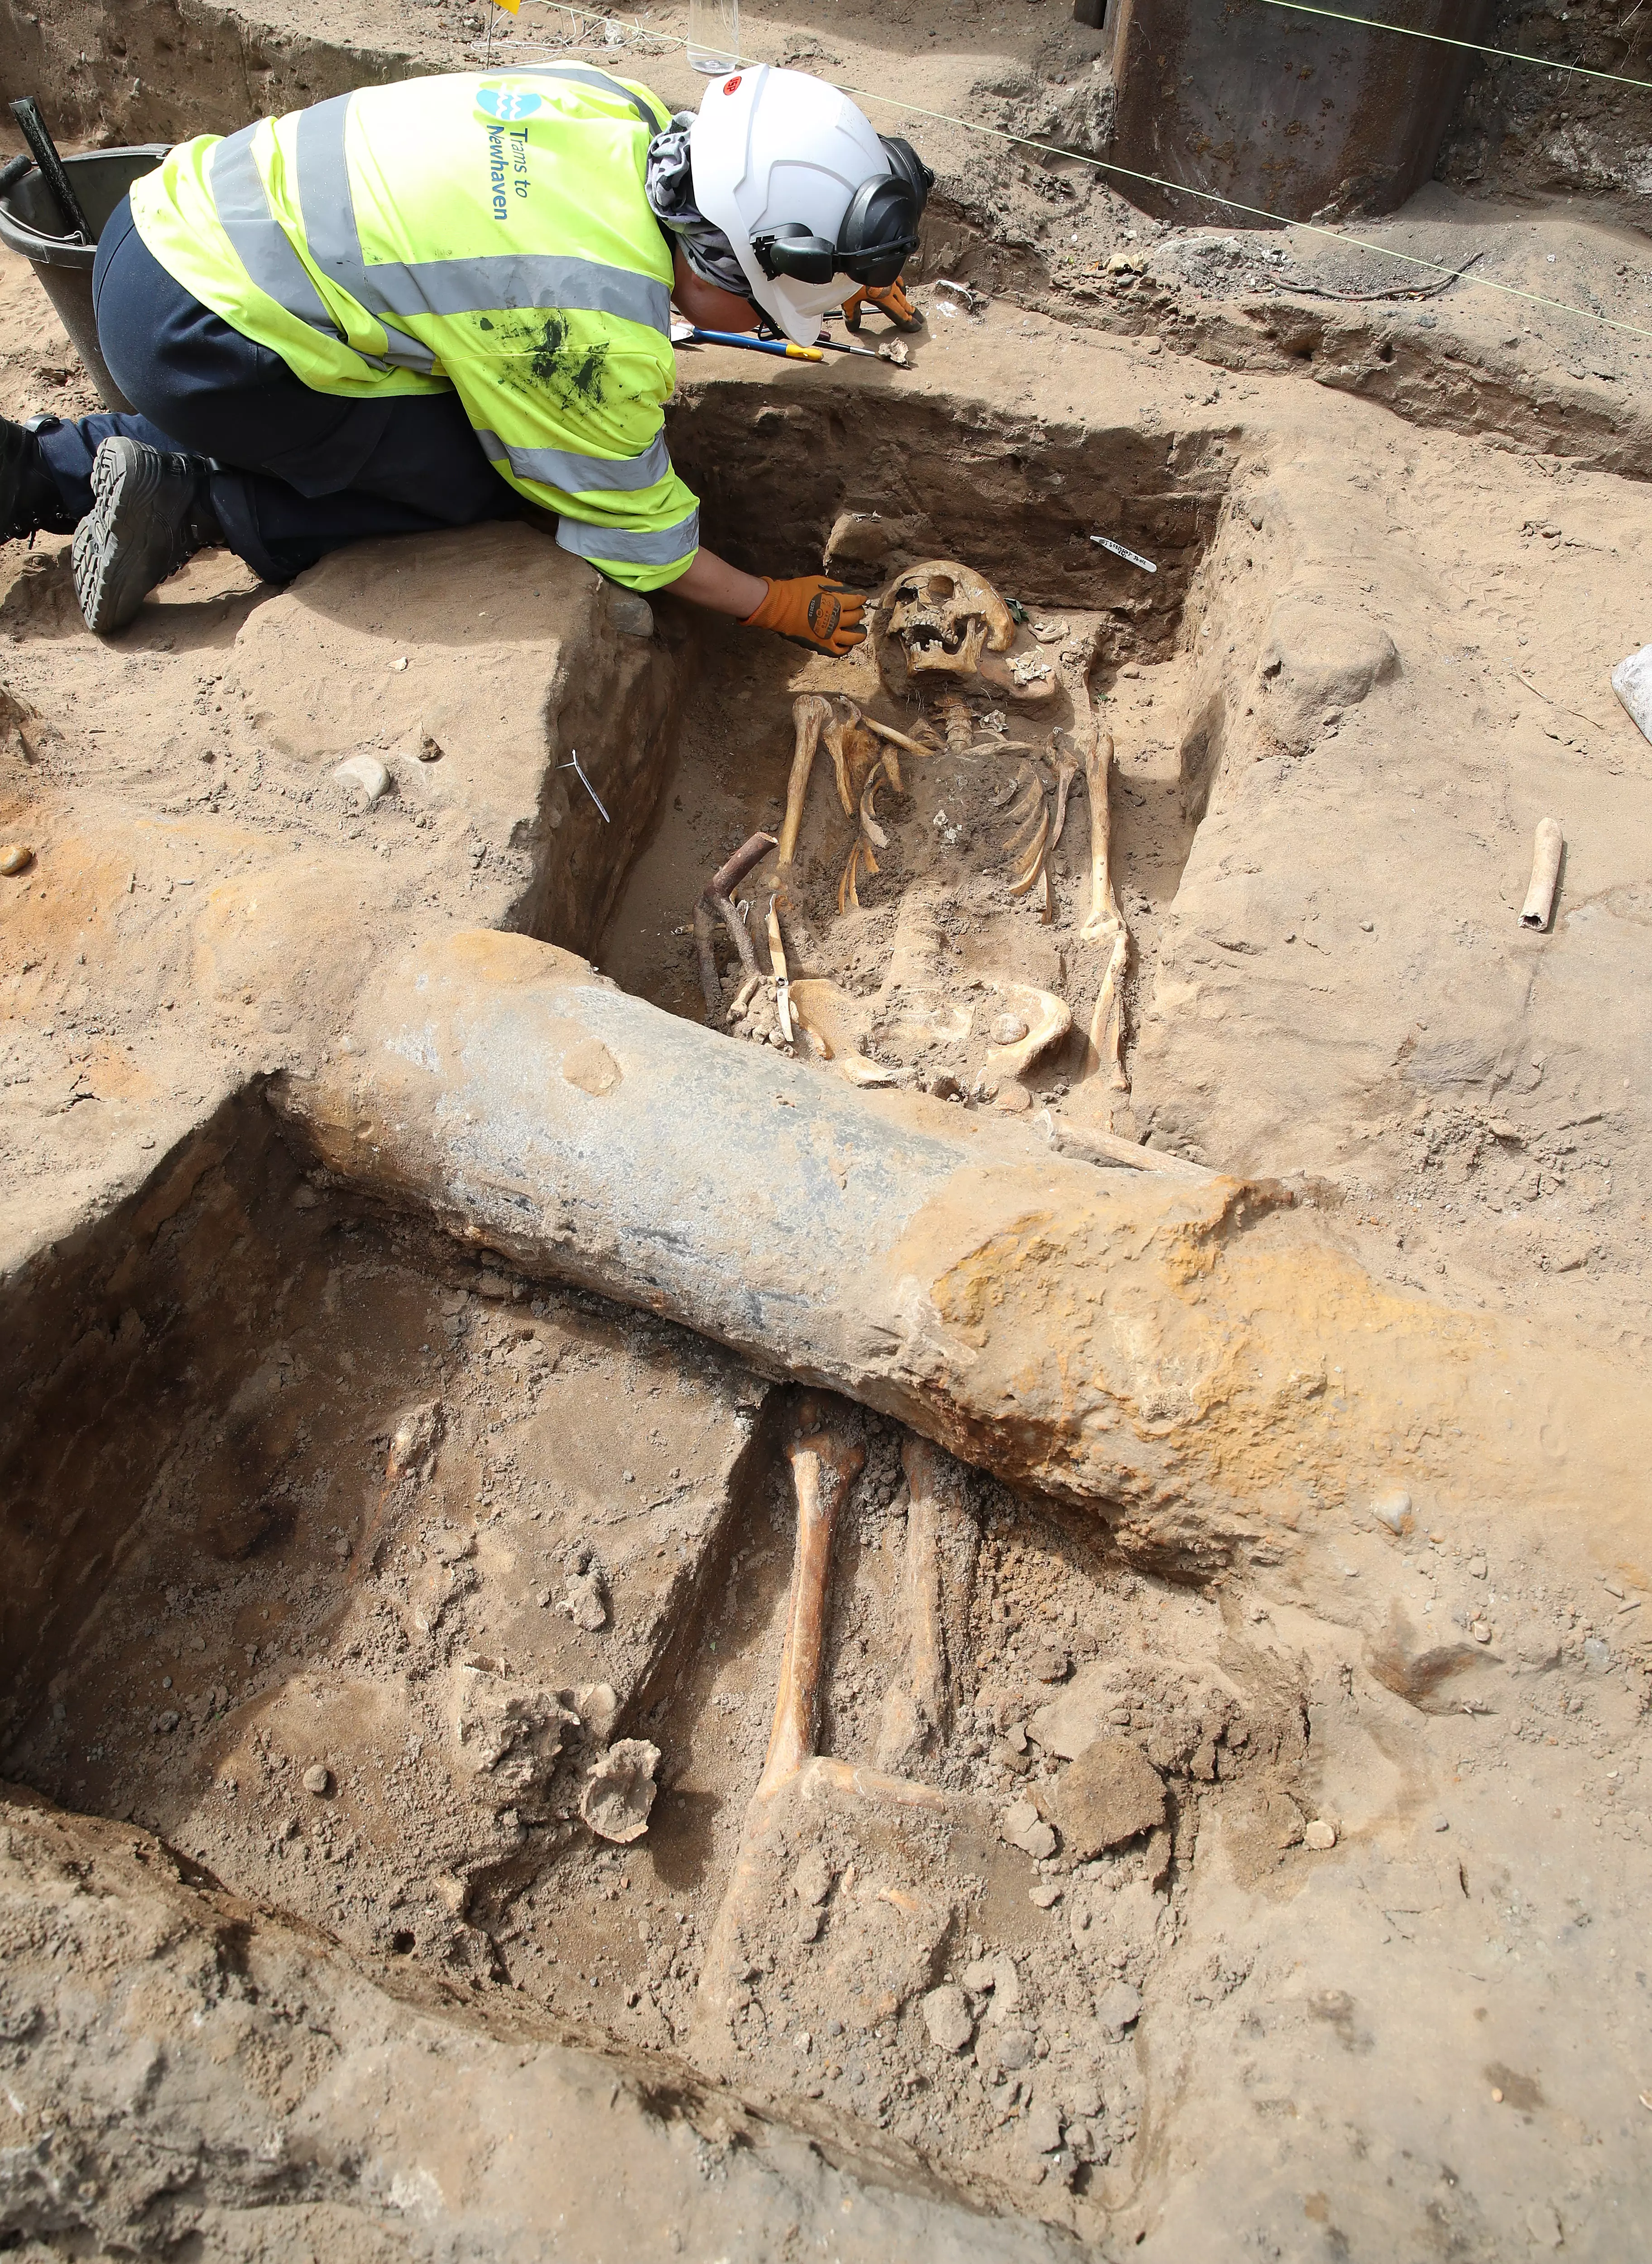 Archaeologists have found 10 bodies at the site in Edinburgh.